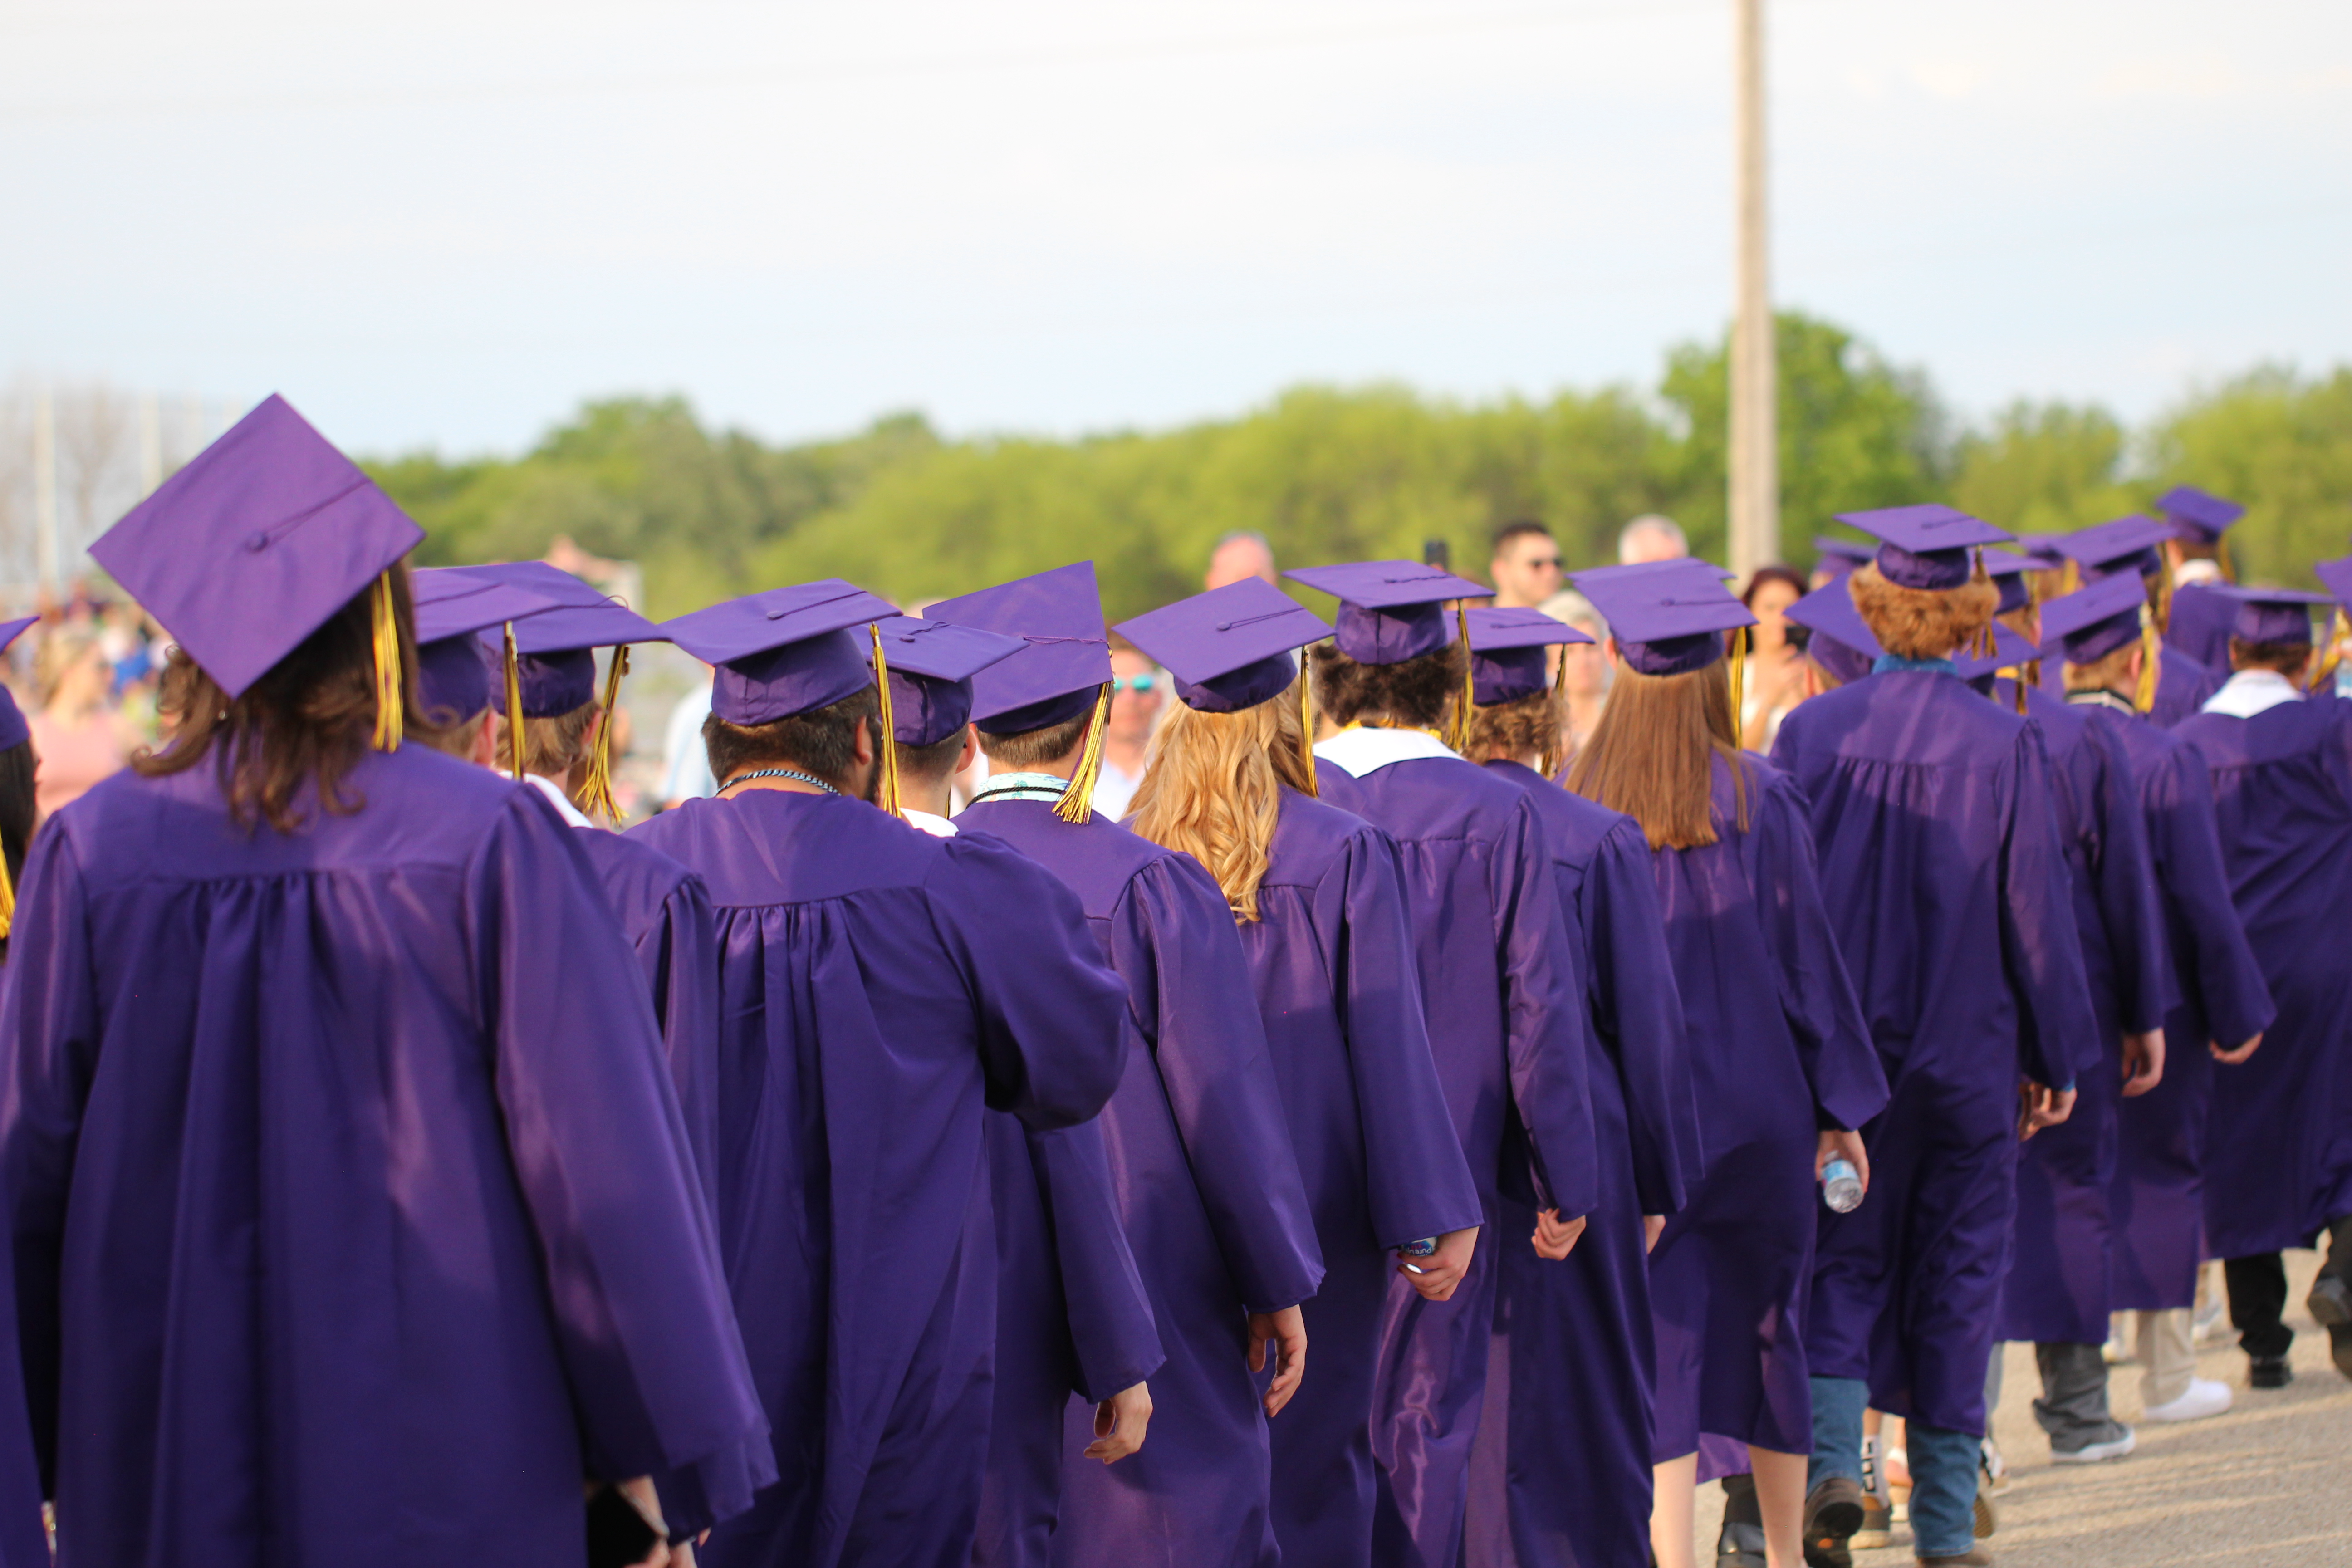 High school students in purple graduation caps and gowns